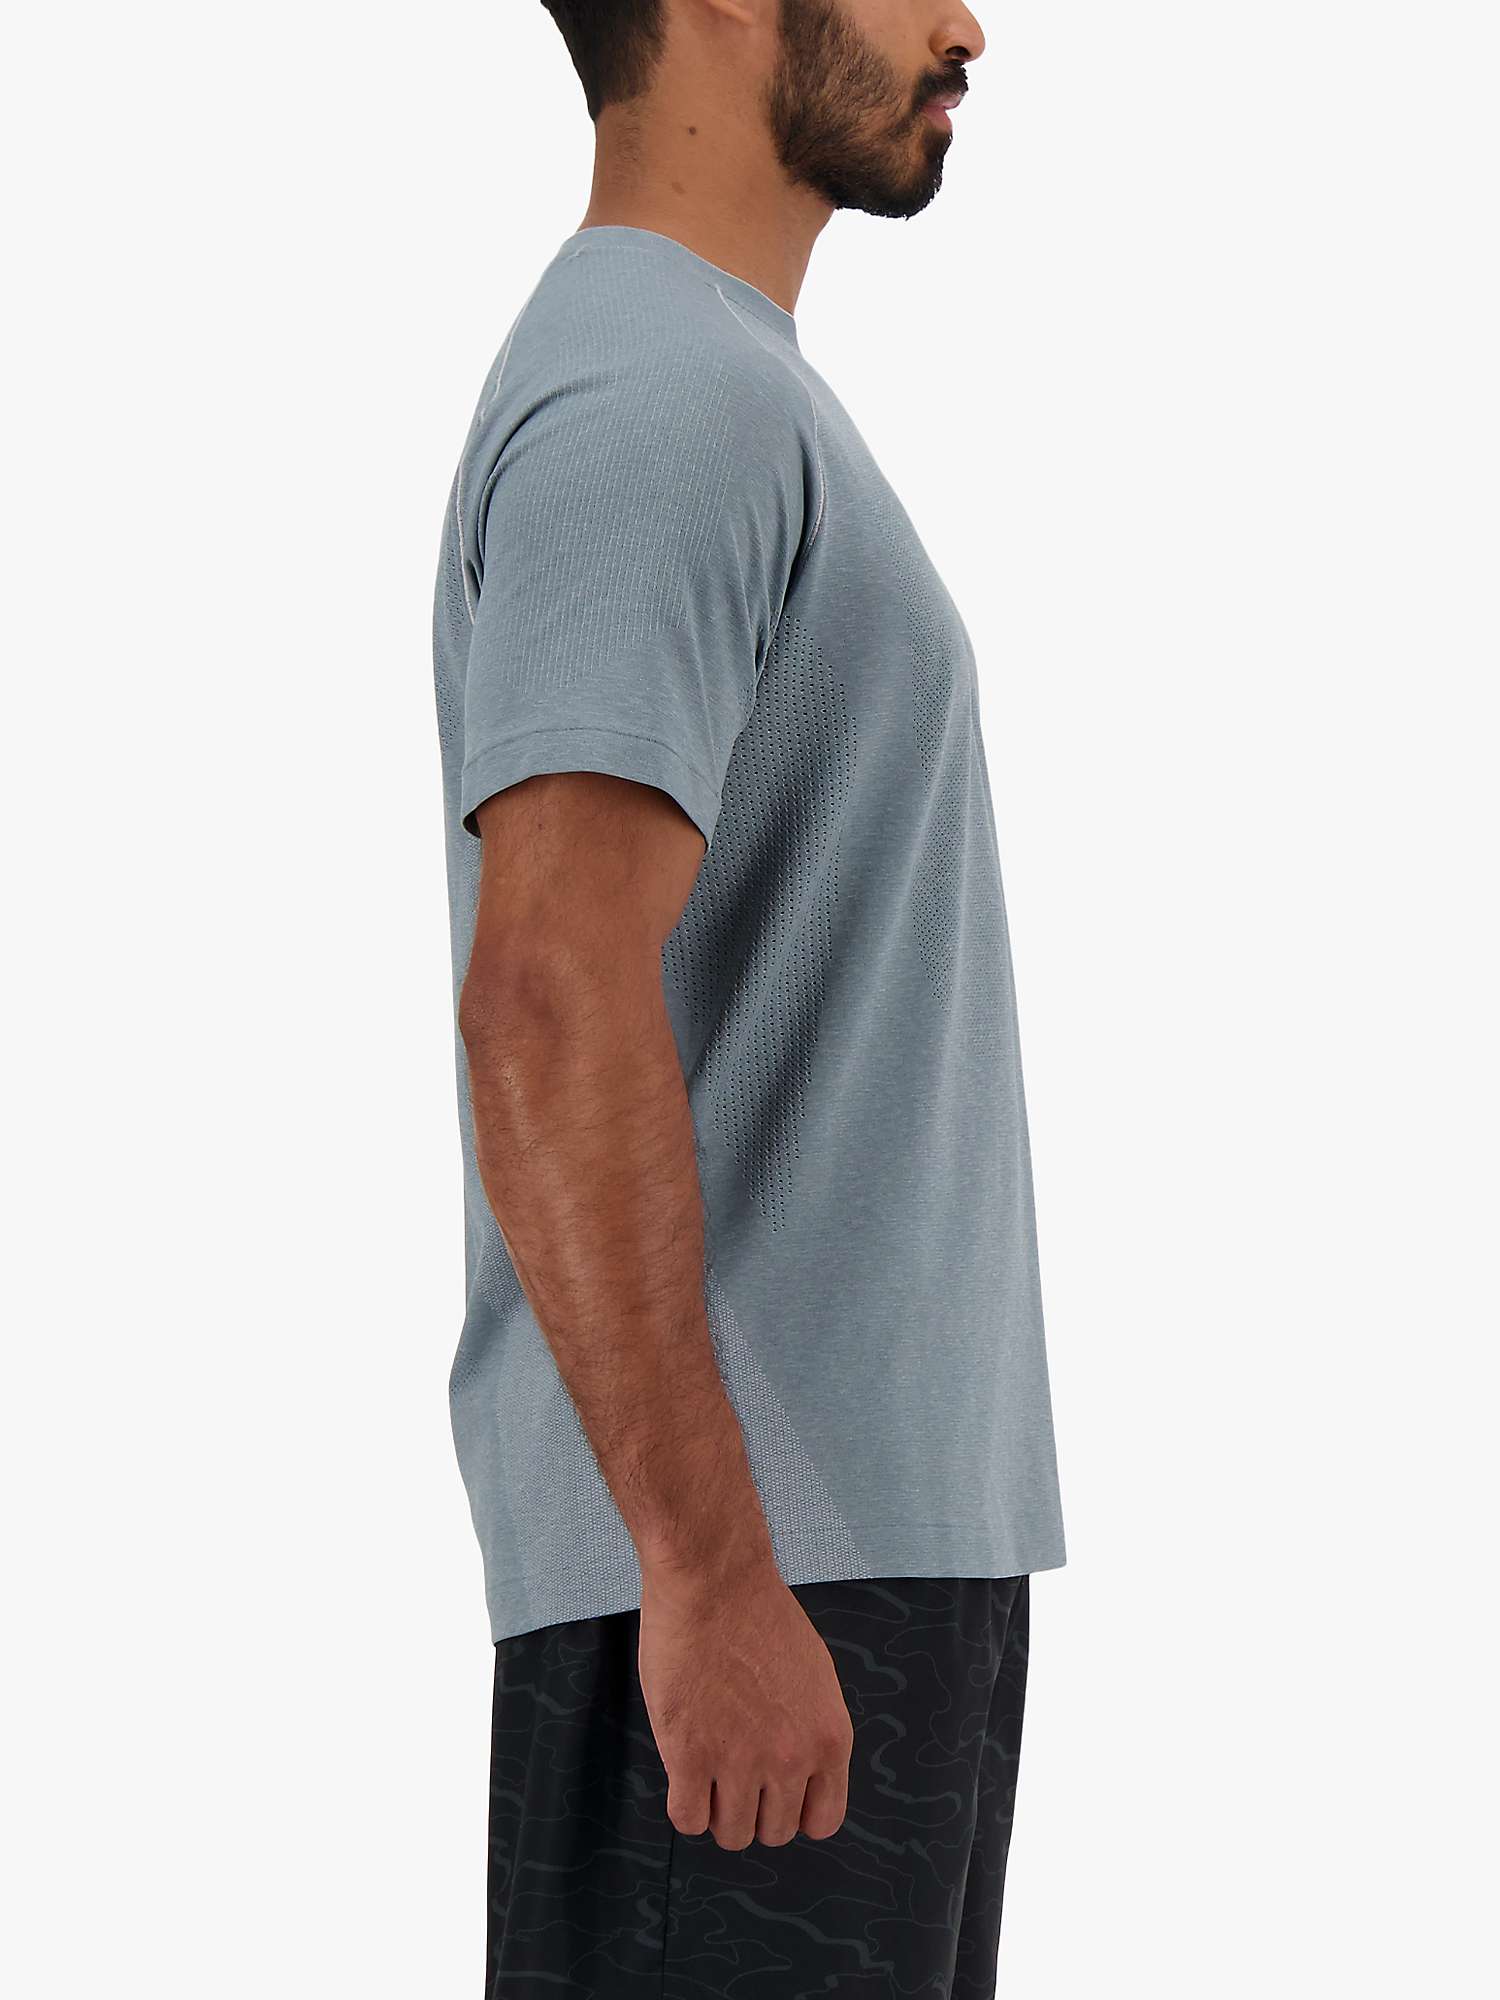 Buy New Balance Knit T-Shirt,  Athletic Grey Online at johnlewis.com